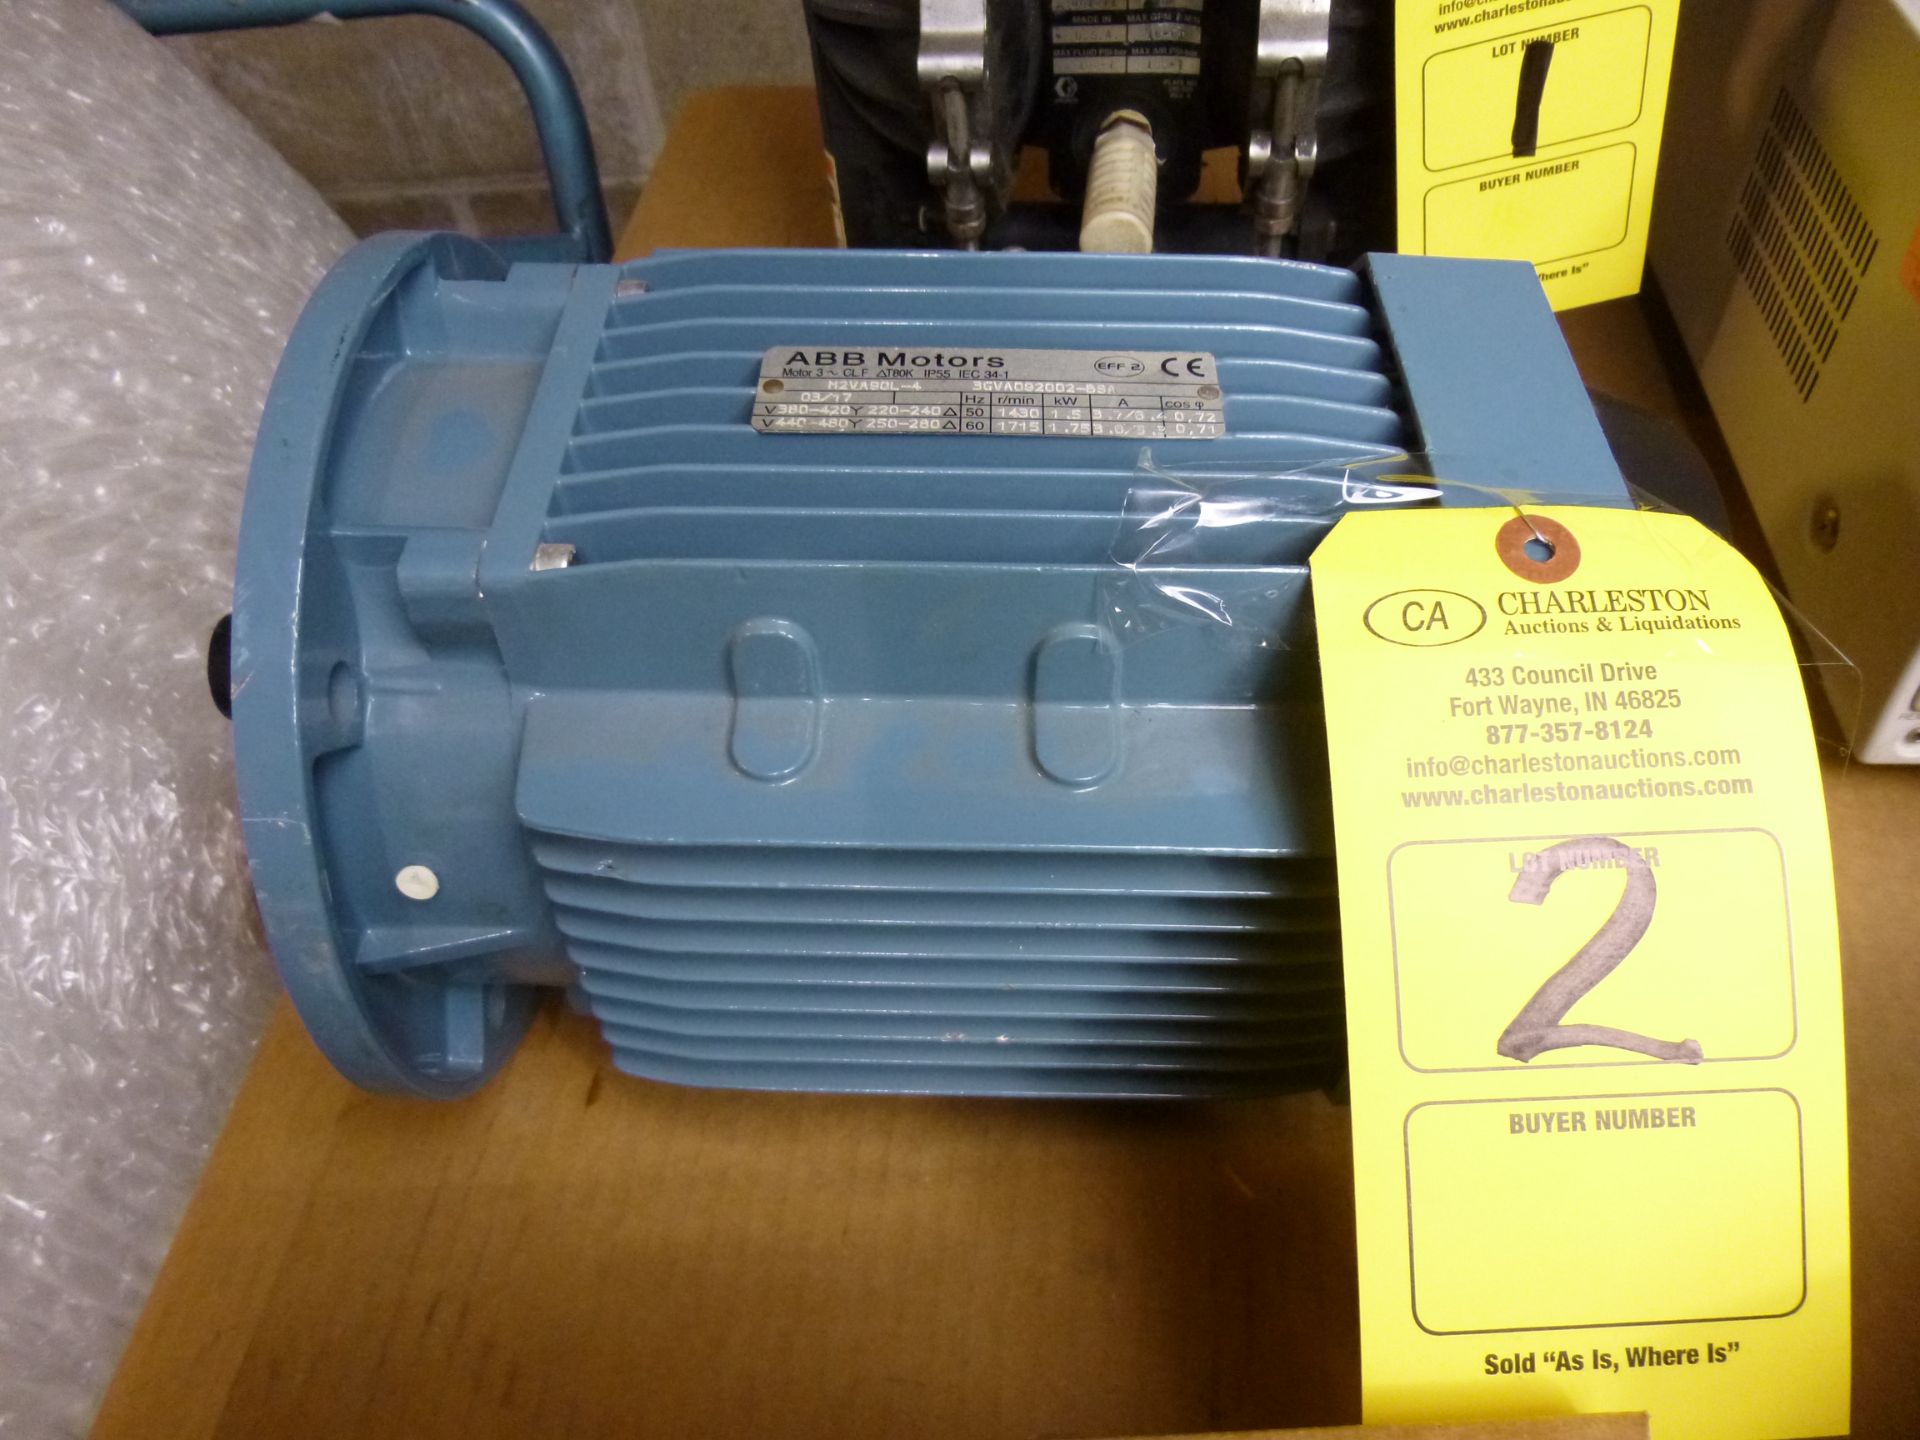 ABB Motors M2VA90L-4 3GVA092002-B5A, NEW fan cover on end is dented. Shipping can be prepared for